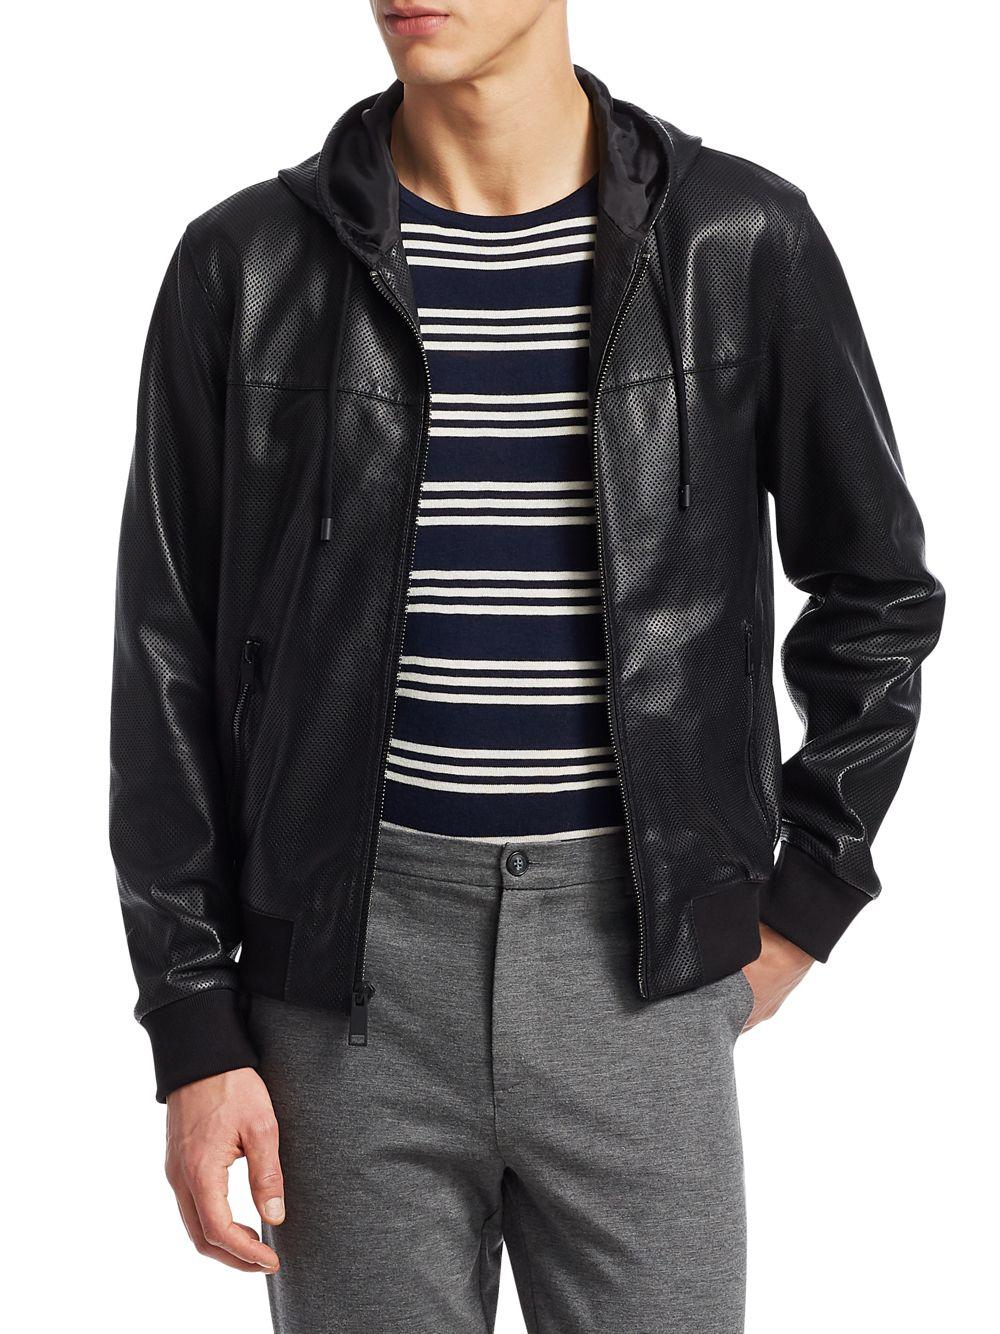 Saks Fifth Avenue Modern Perforated Leather Jacket in Black for Men ...